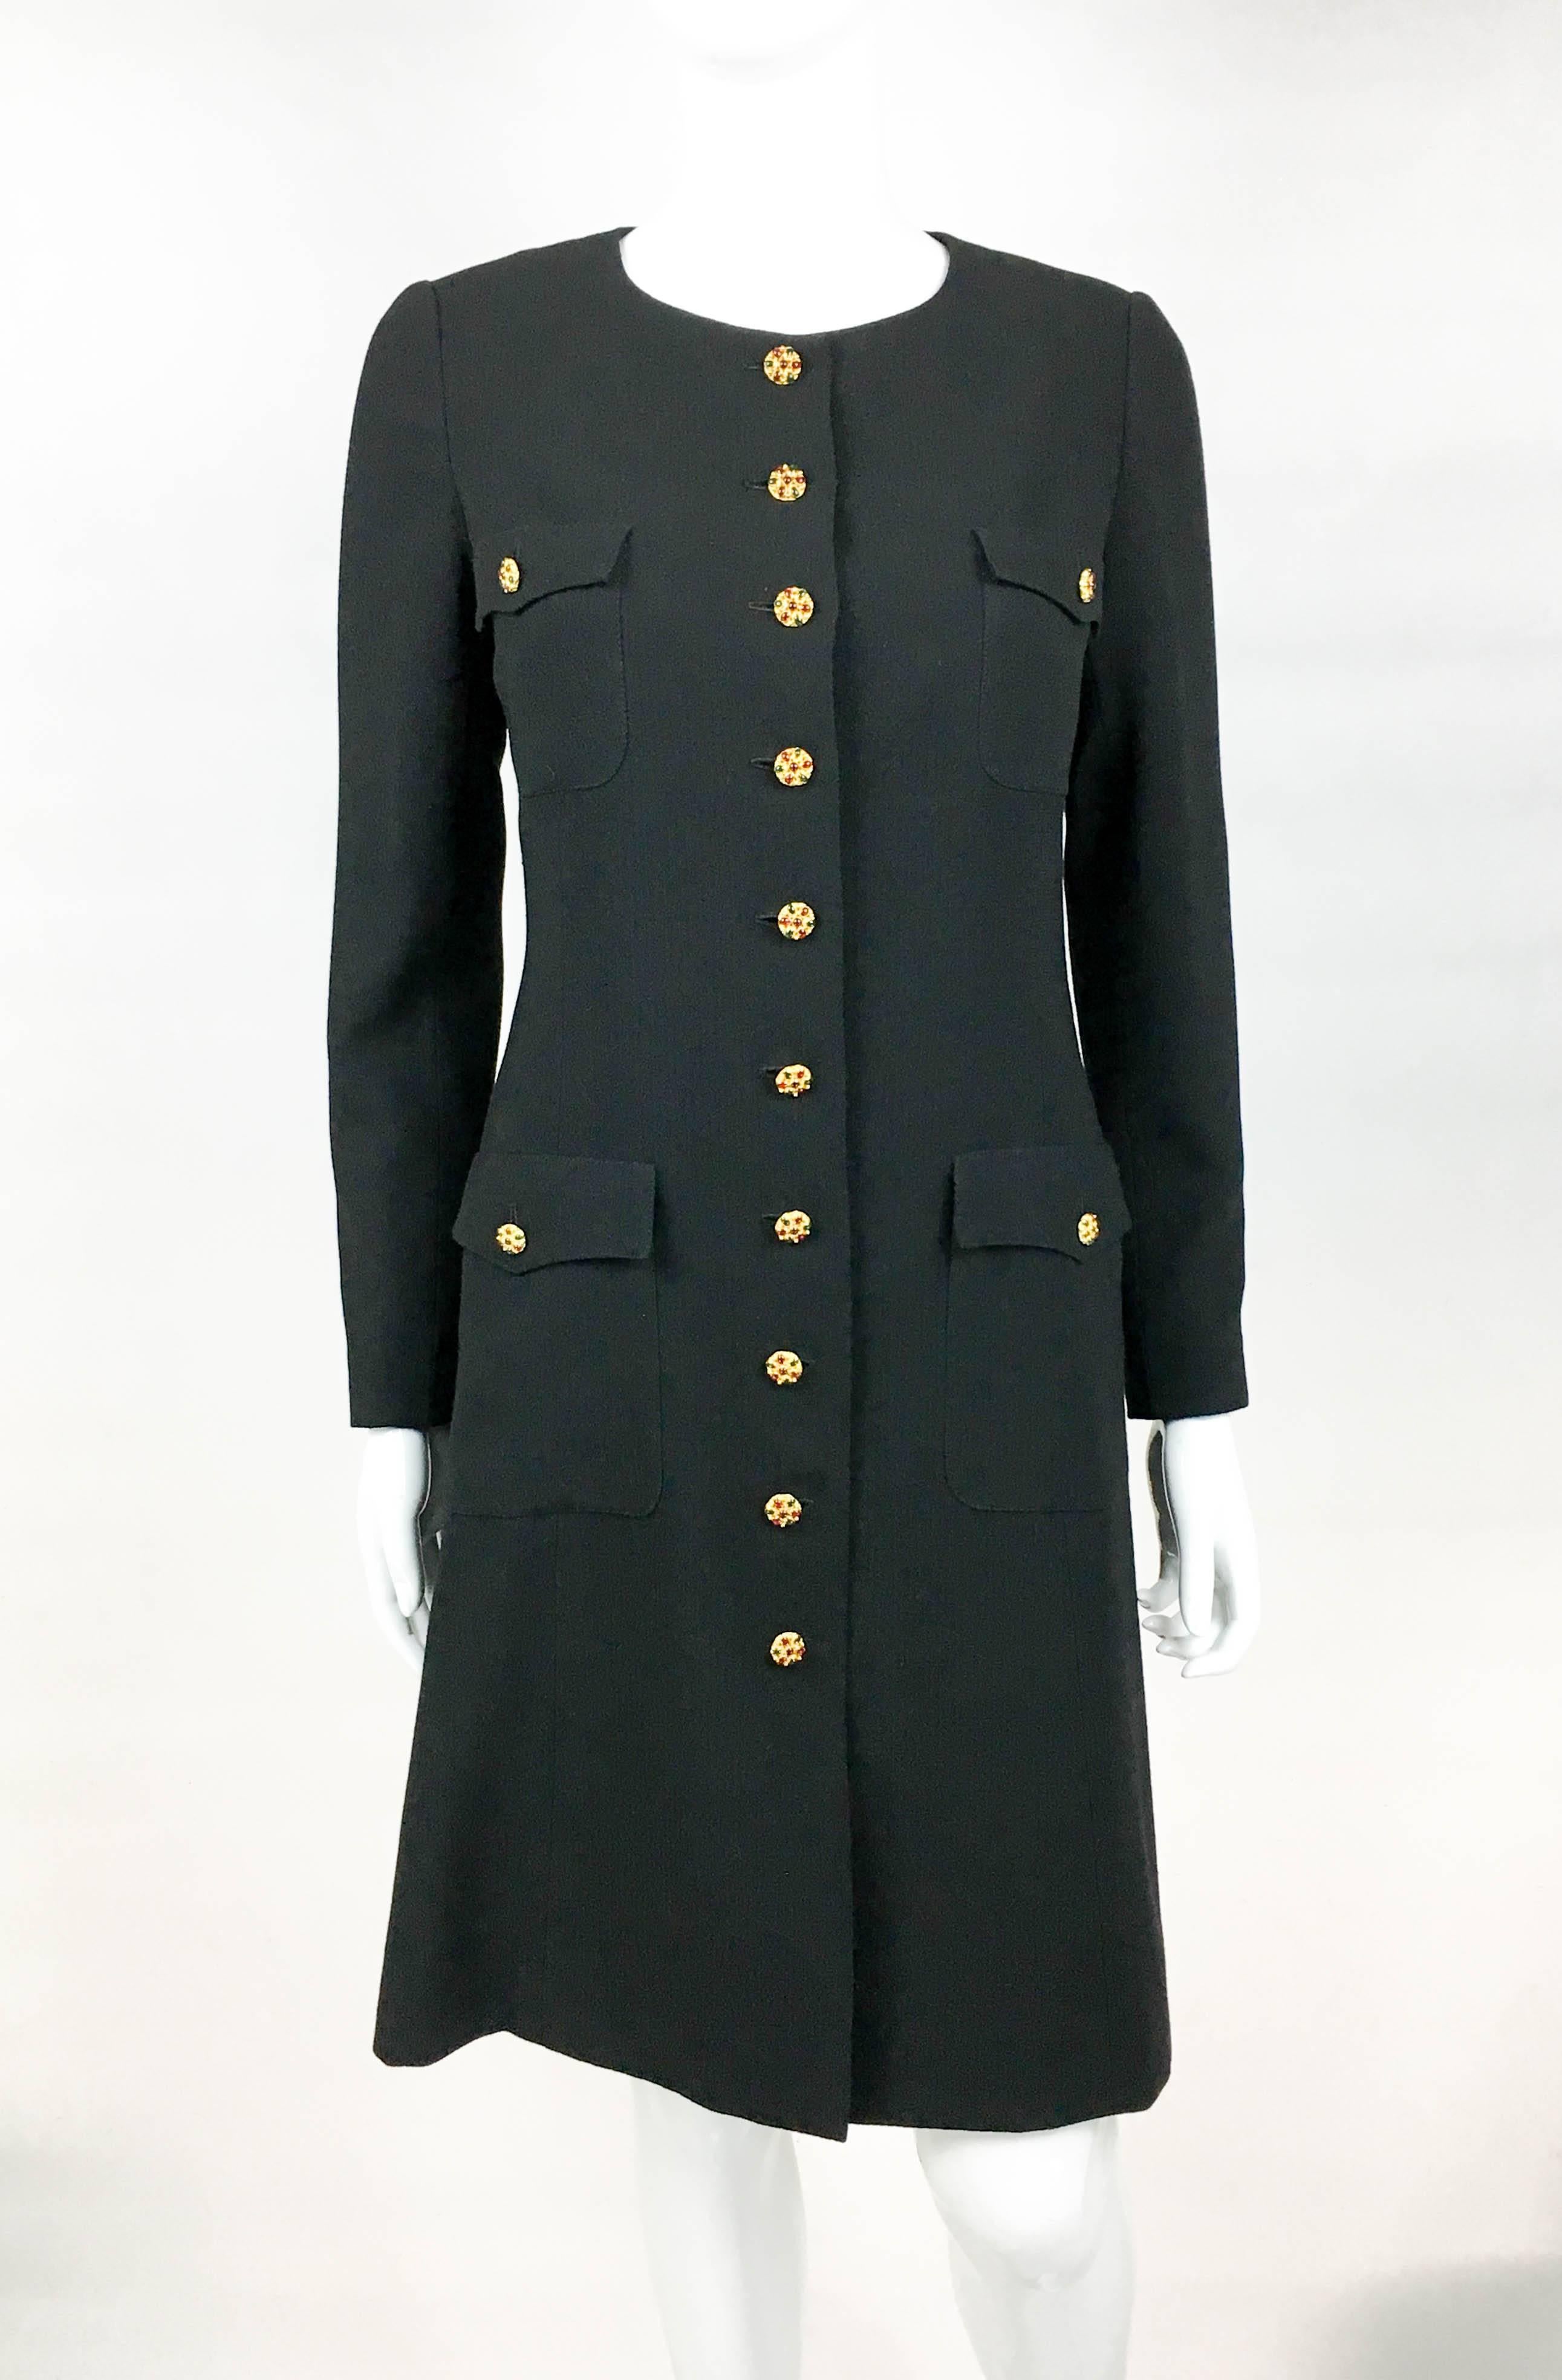 1996 Chanel Runway Look Black Wool Coat / Dress With Baroque-Style Buttons In Excellent Condition In London, Chelsea